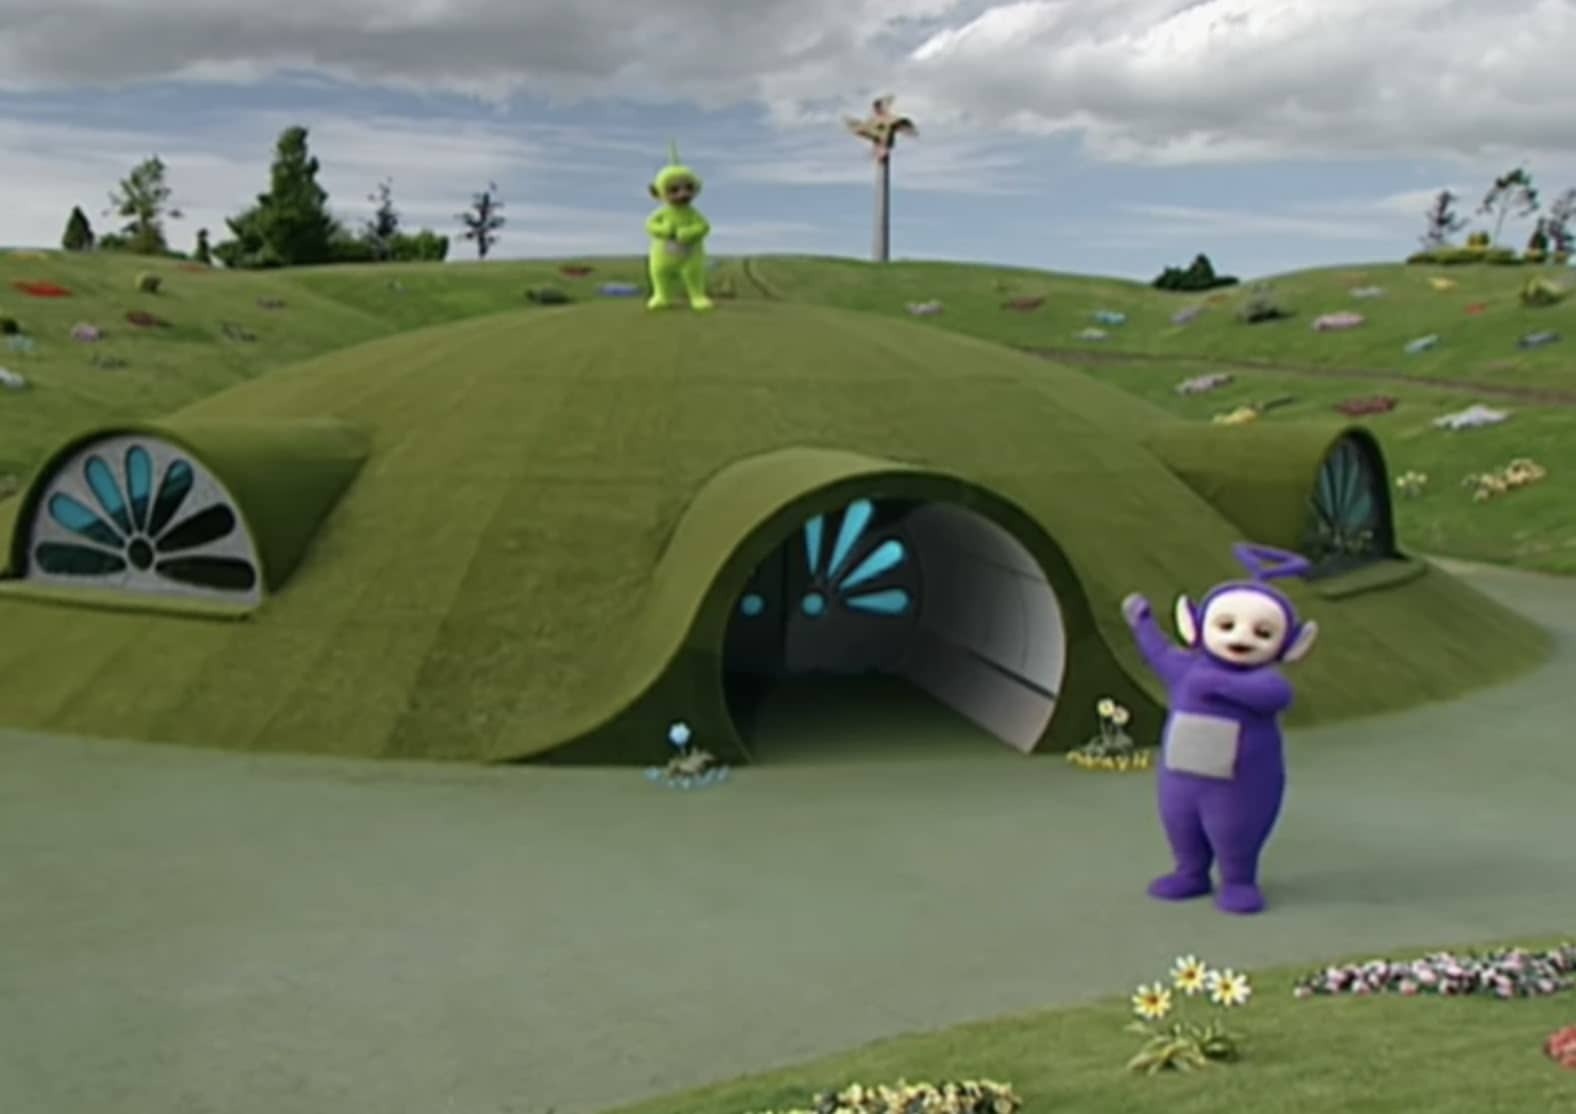 The Teletubbies house